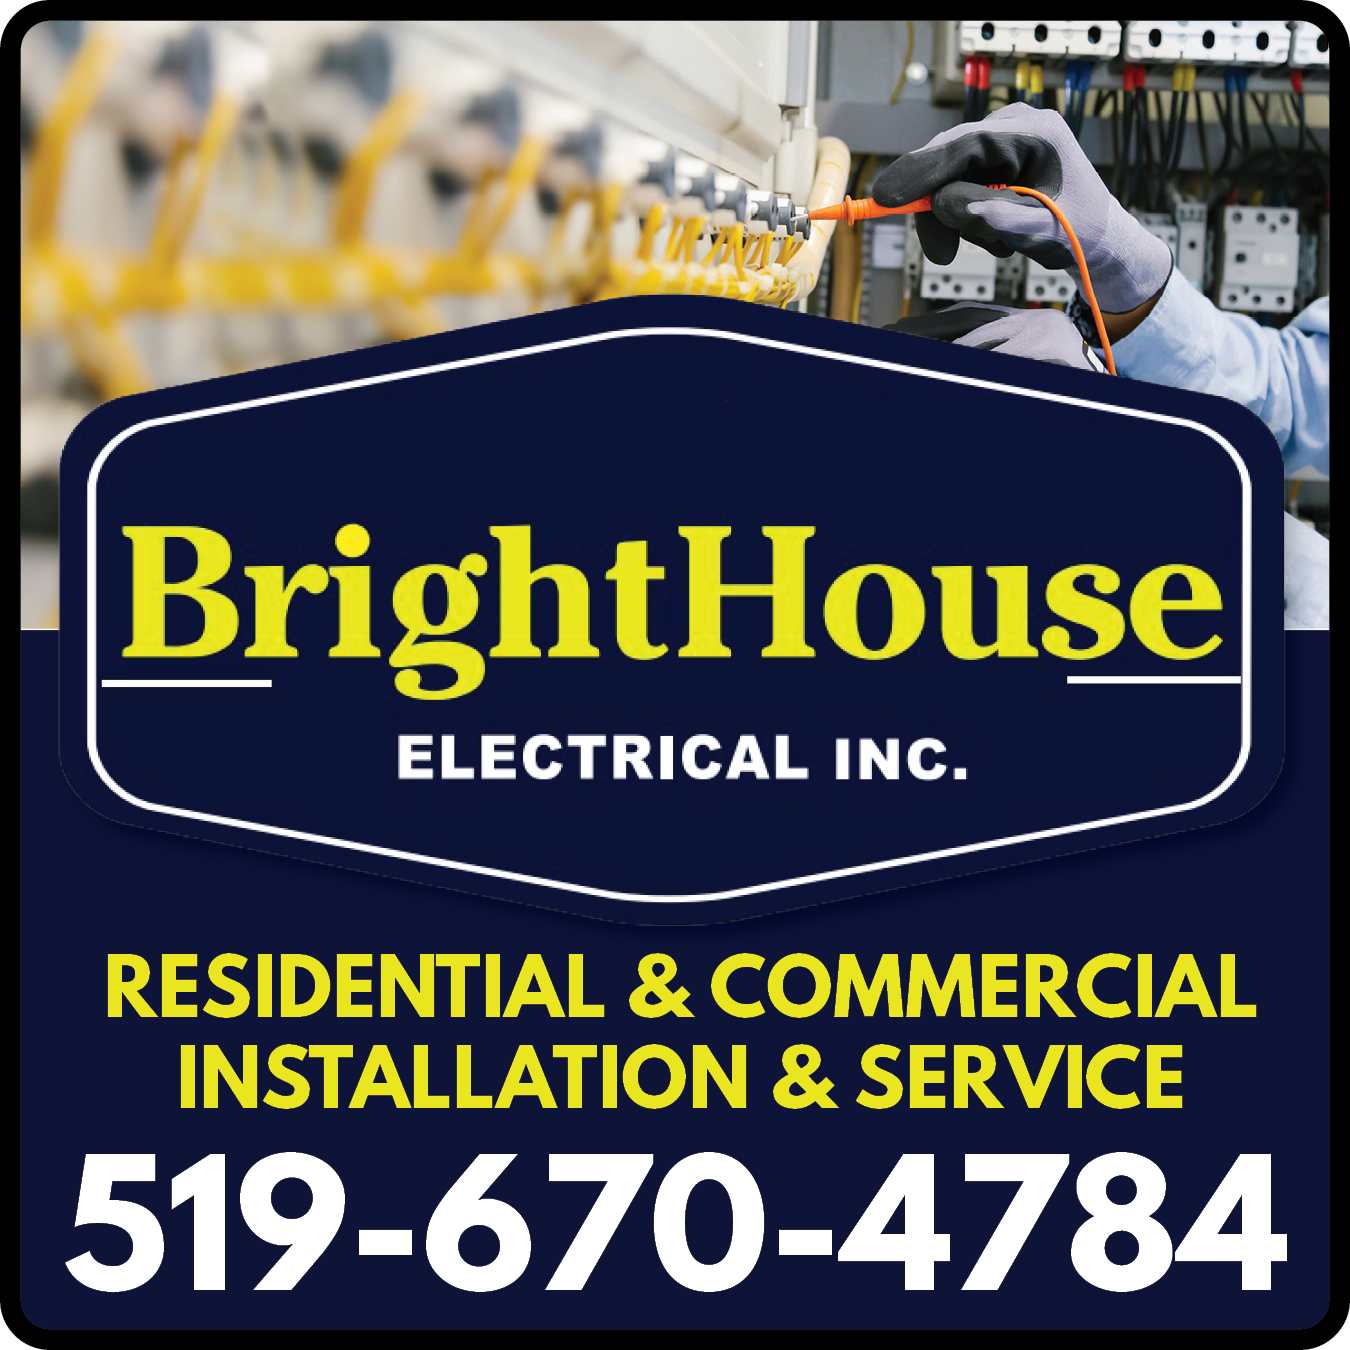 BrightHouse Electrical Inc